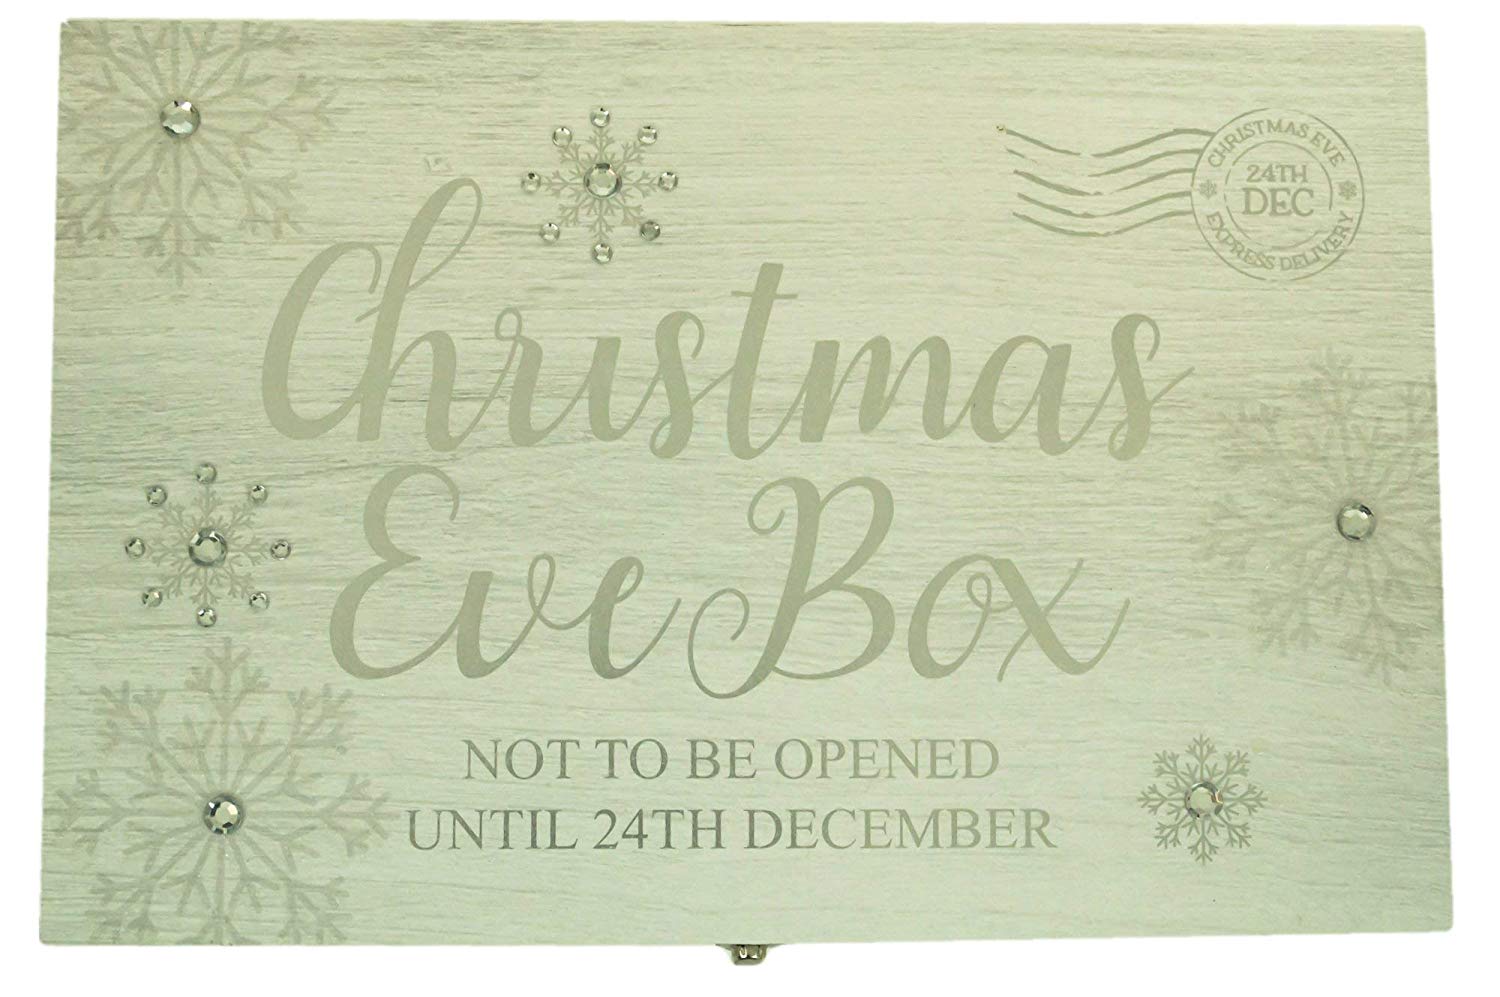 Wooden Silver Christmas Eve Gift Box with Glass Gem Inlay - hanrattycraftsgifts.co.uk